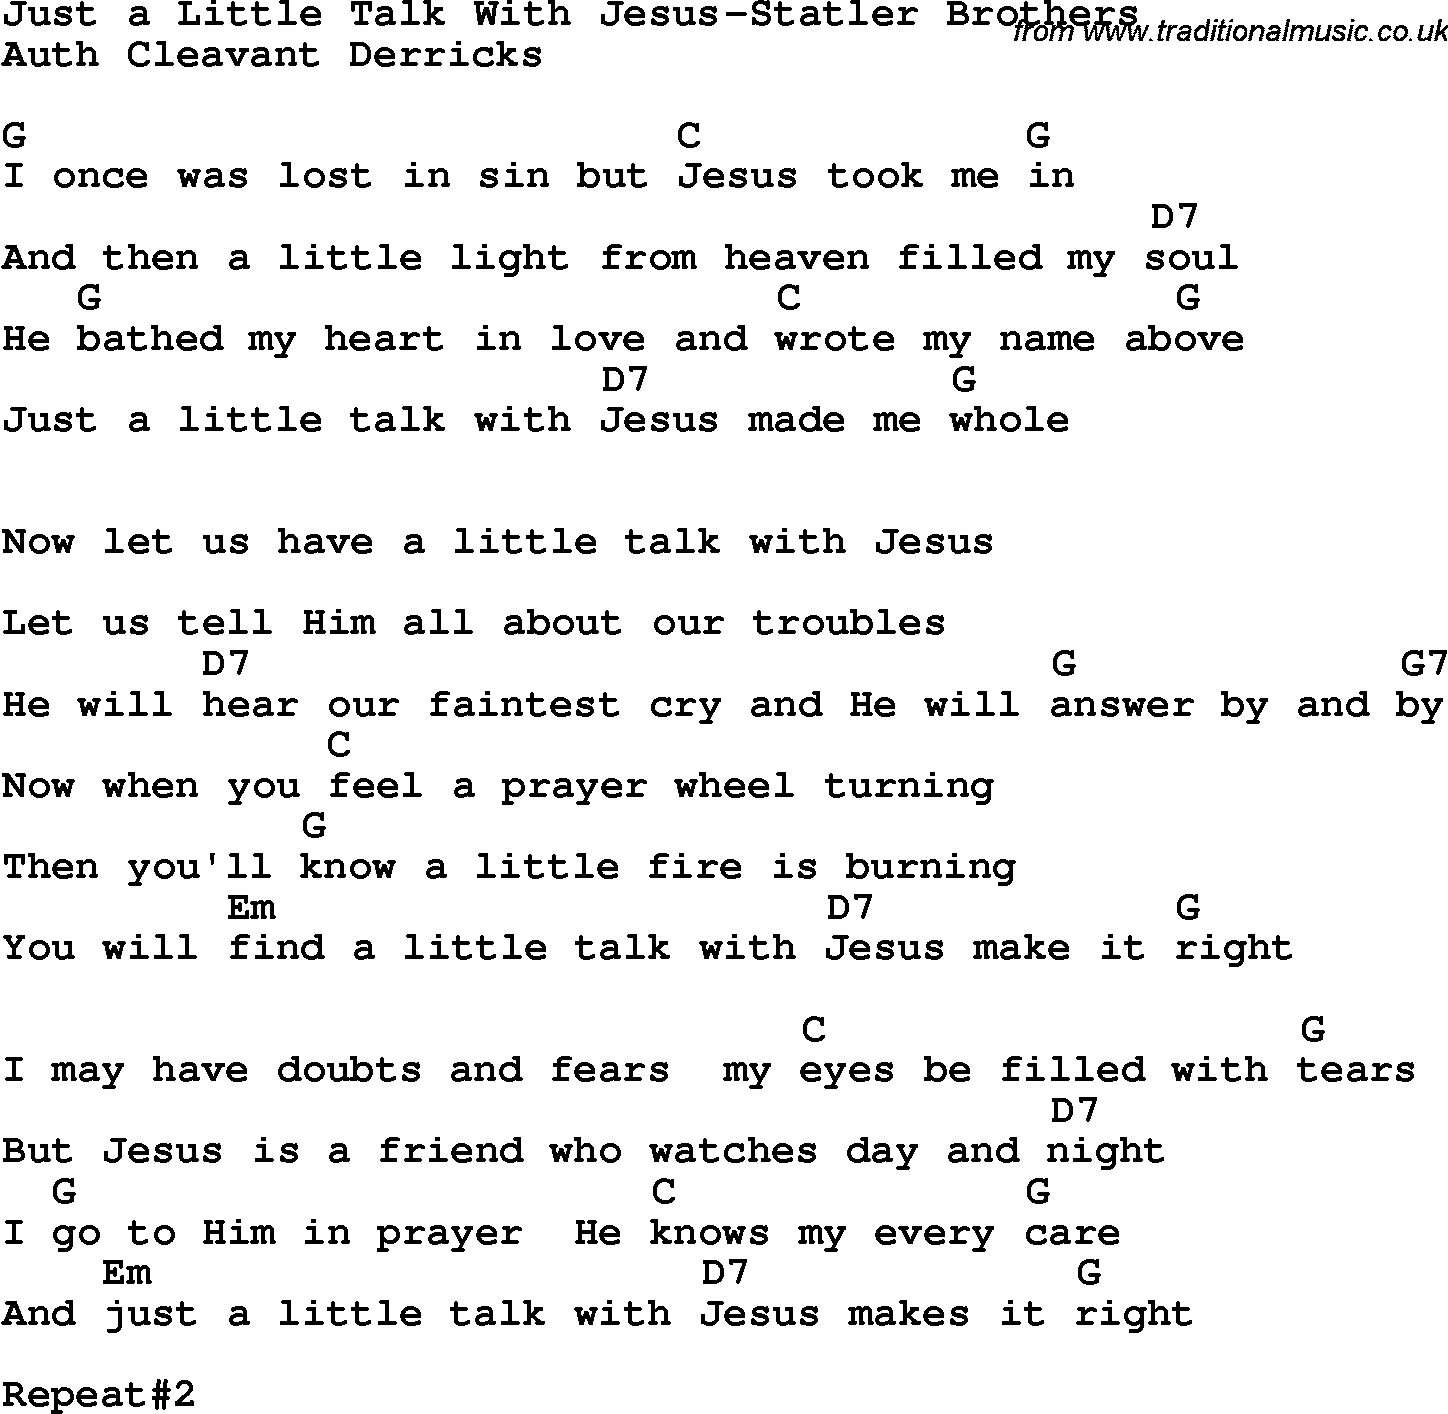 Country, Southern and Bluegrass Gospel Song Just a Little Talk With Jesus-Statler Brothers lyrics and chords